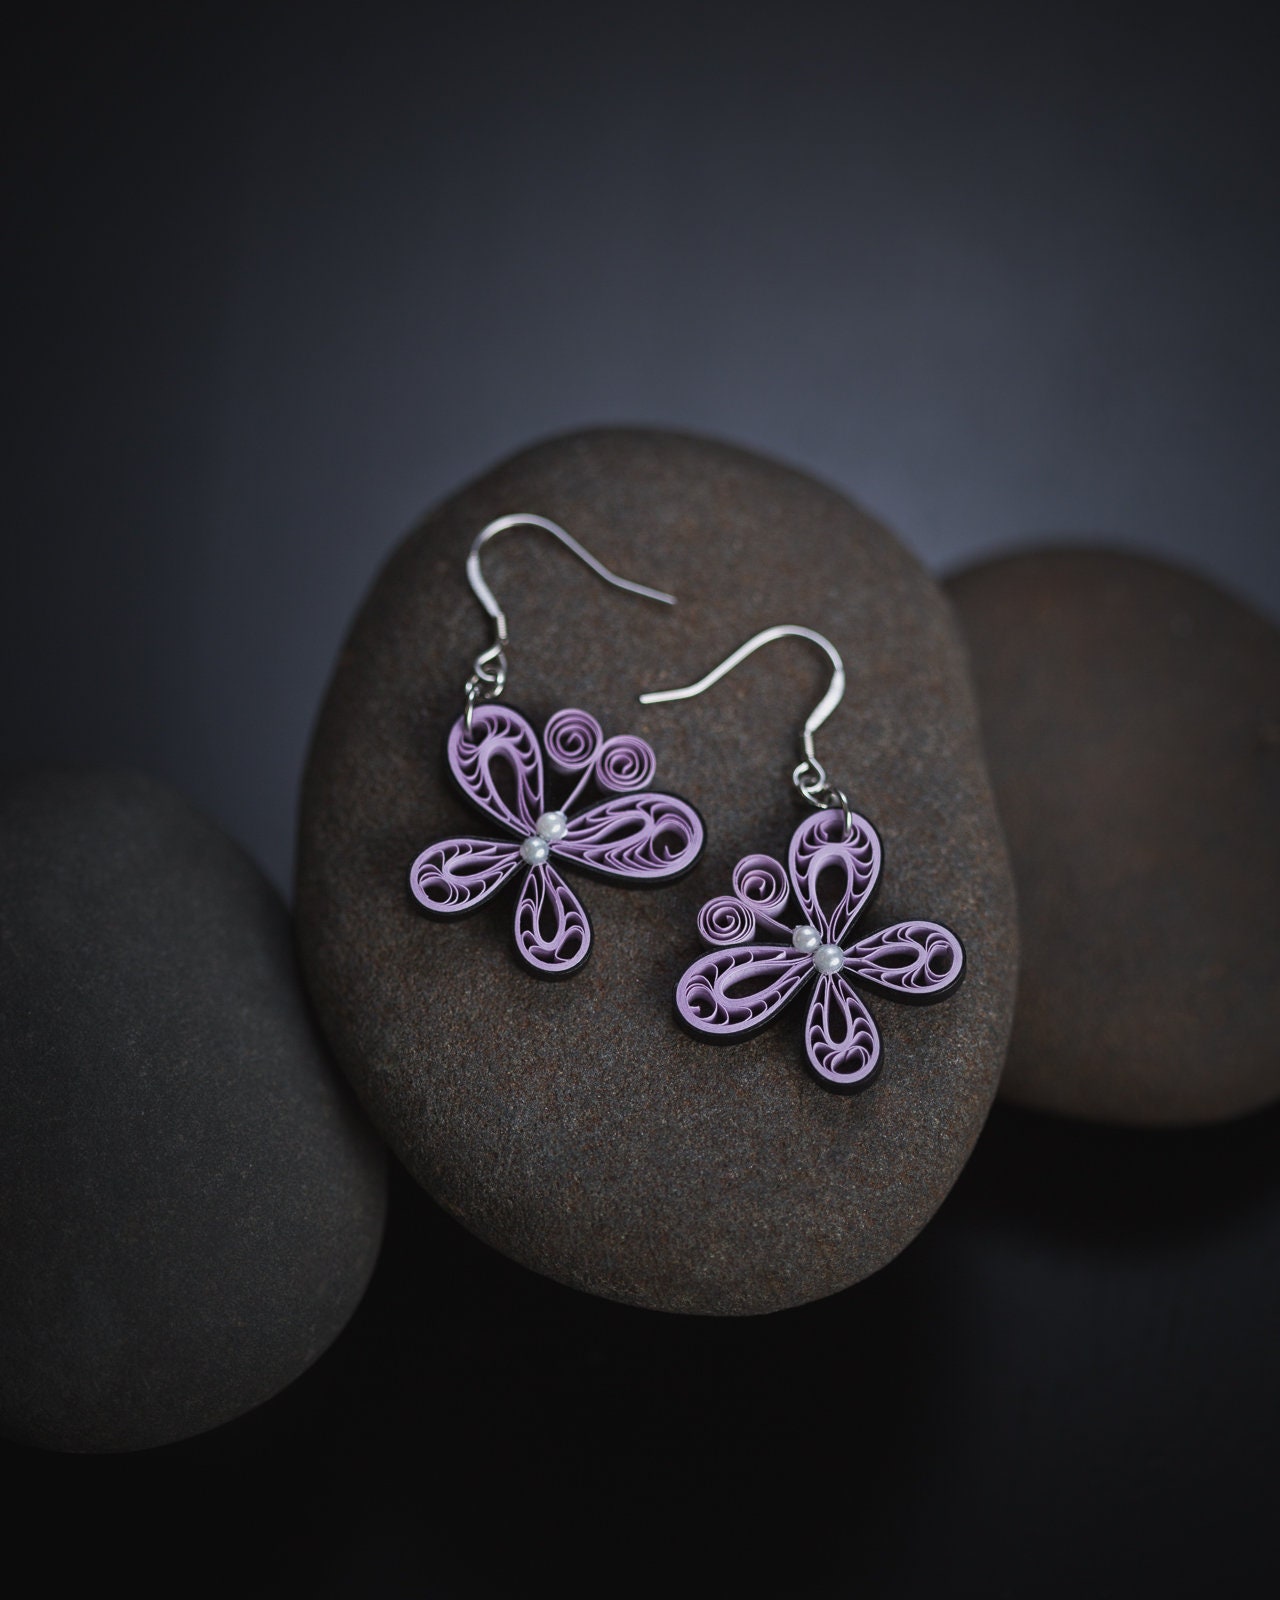 Handmade Jewelry - Paper Quilling Butterfly Clips (1) | Flickr